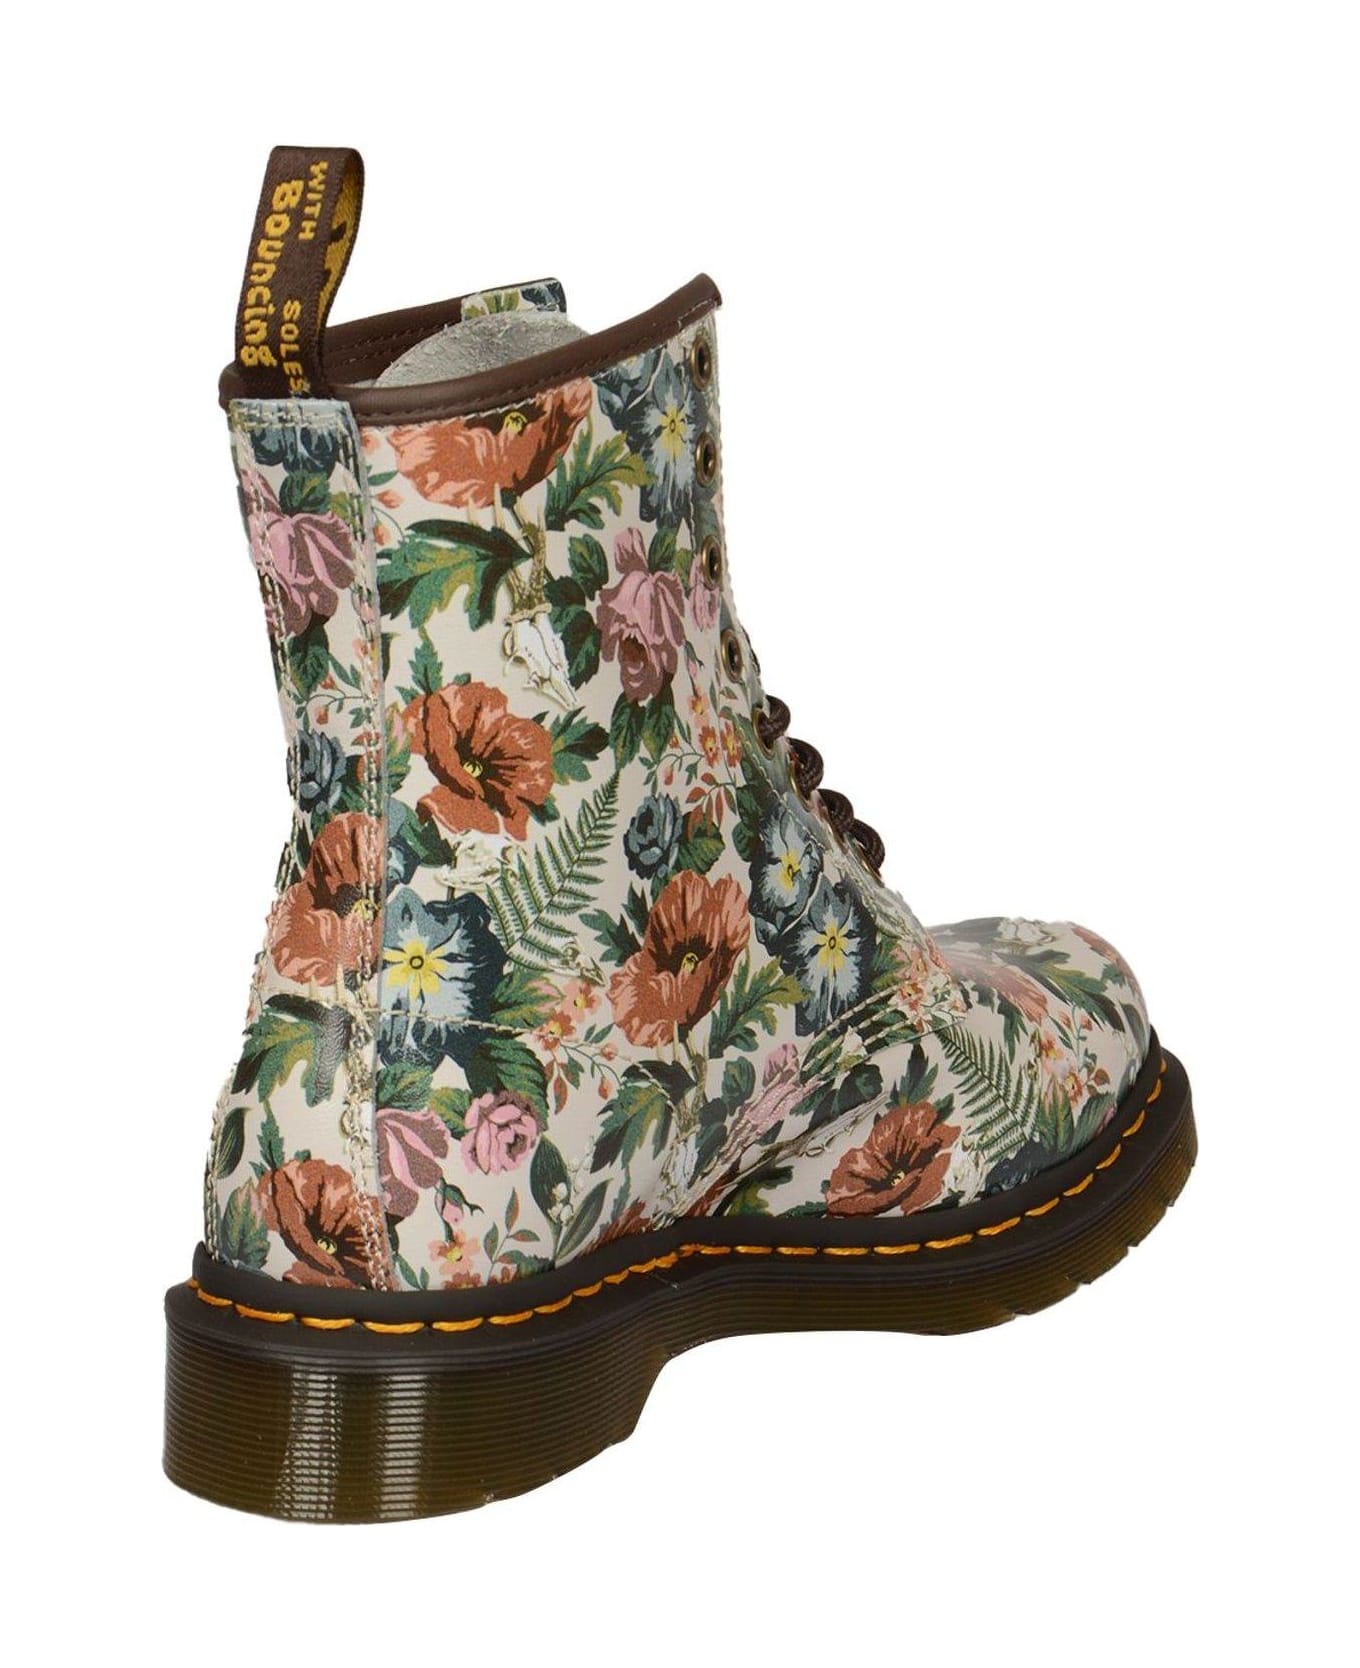 Dr. Martens Lace-up Boots - ENGLISH	GARDEN PRINT BACKHAND